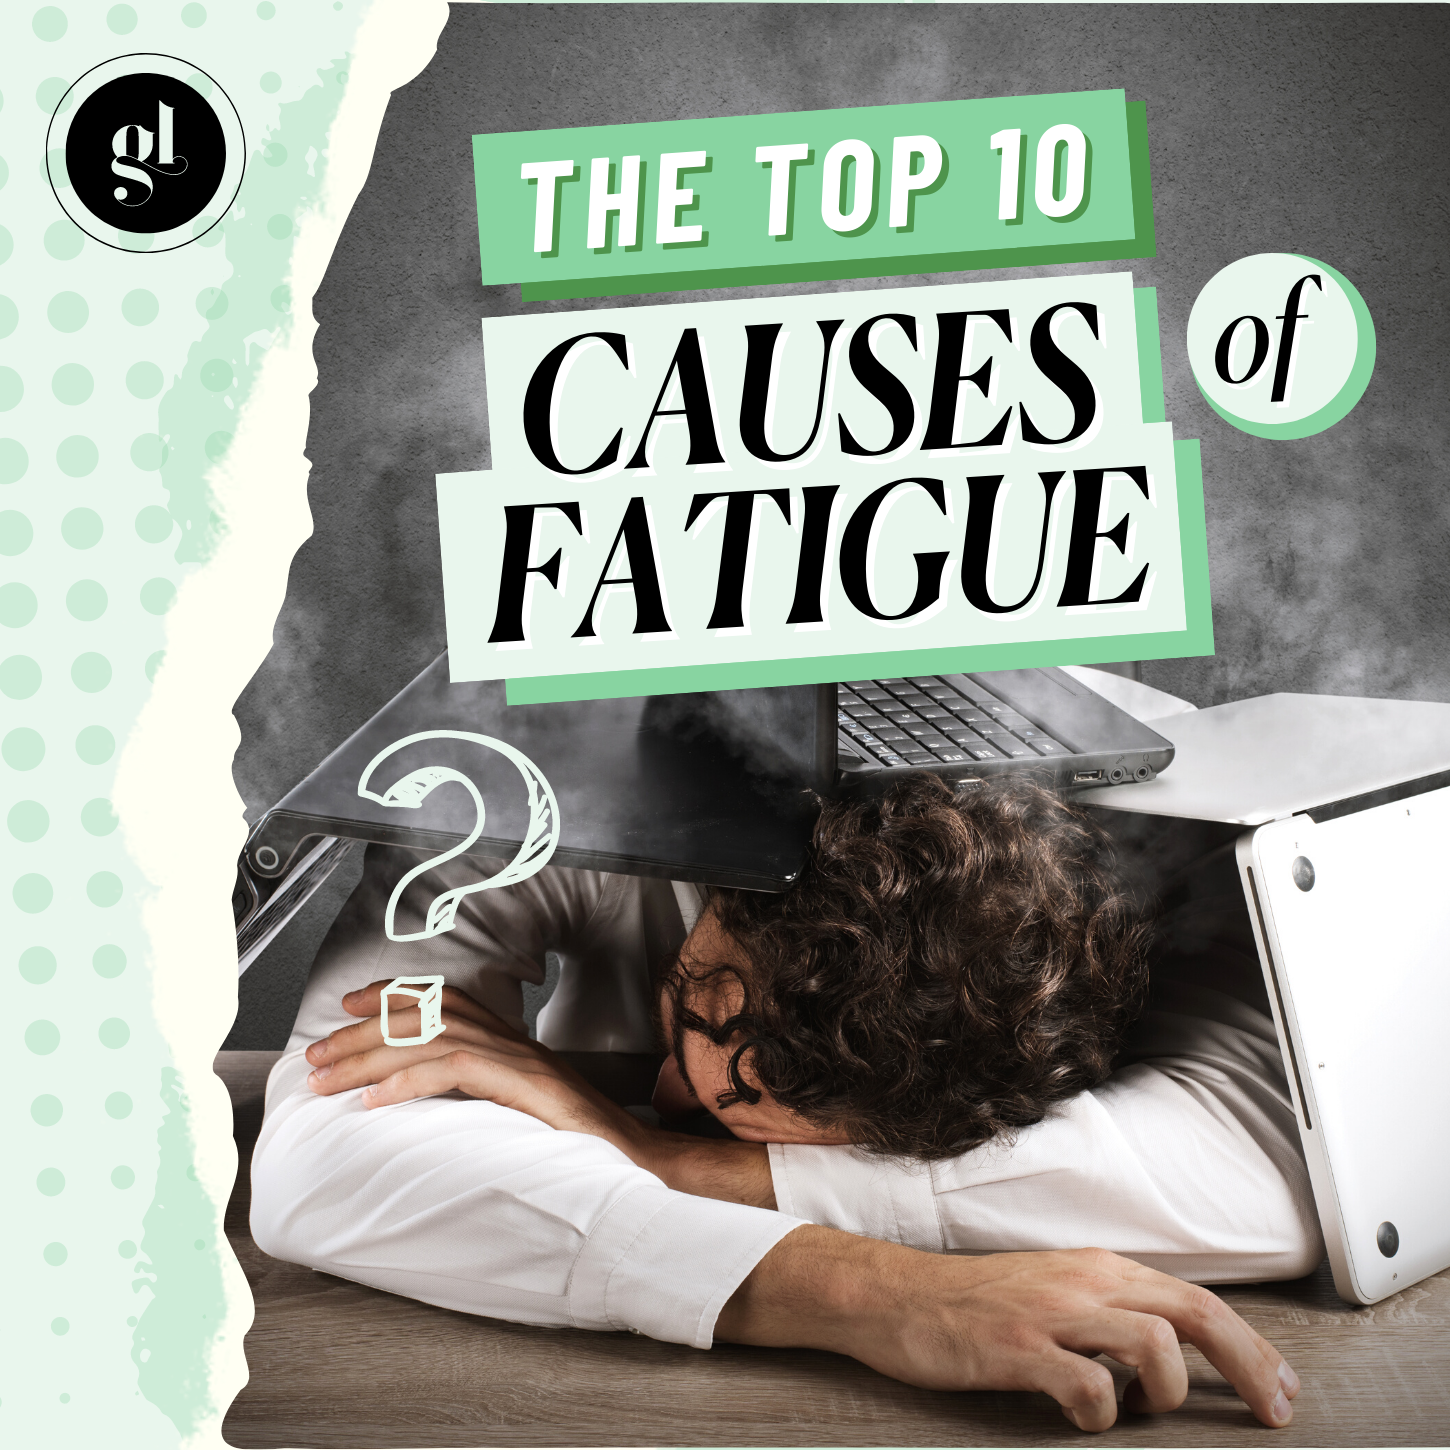 The Top 10 Causes of Fatigue